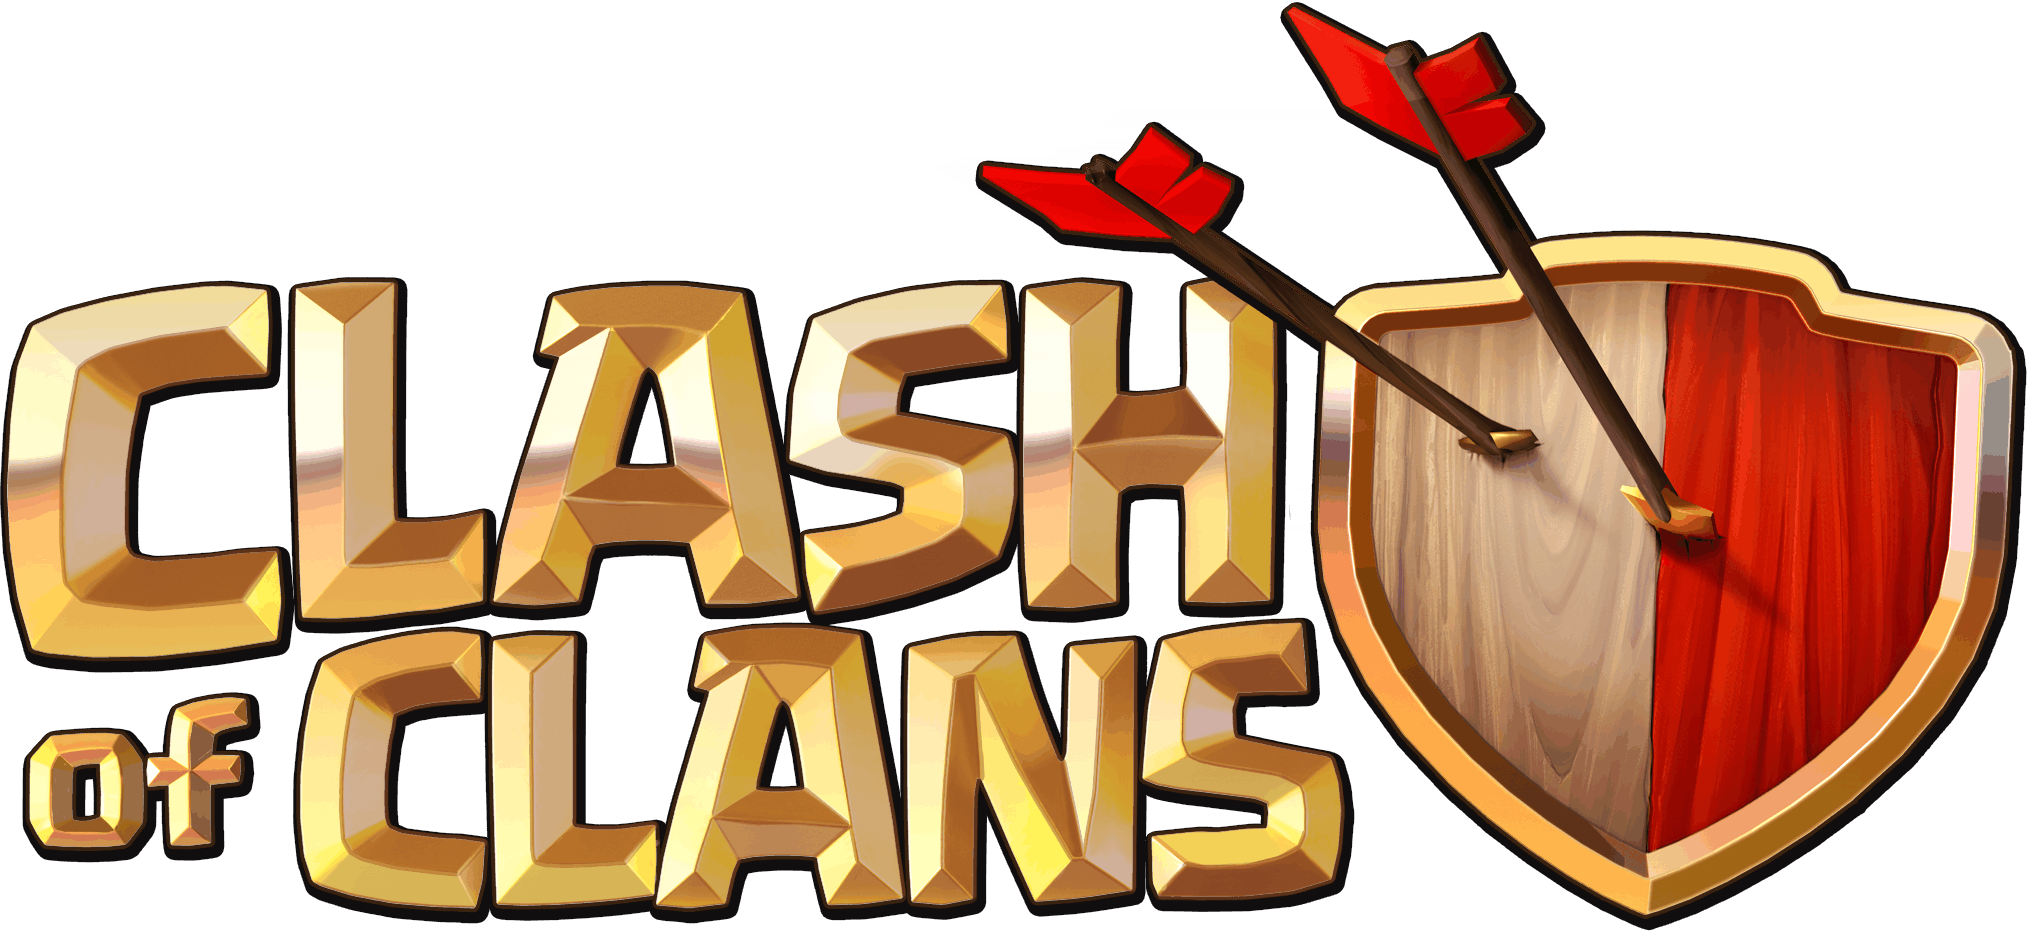 Clash Of Clans Skeleton With 